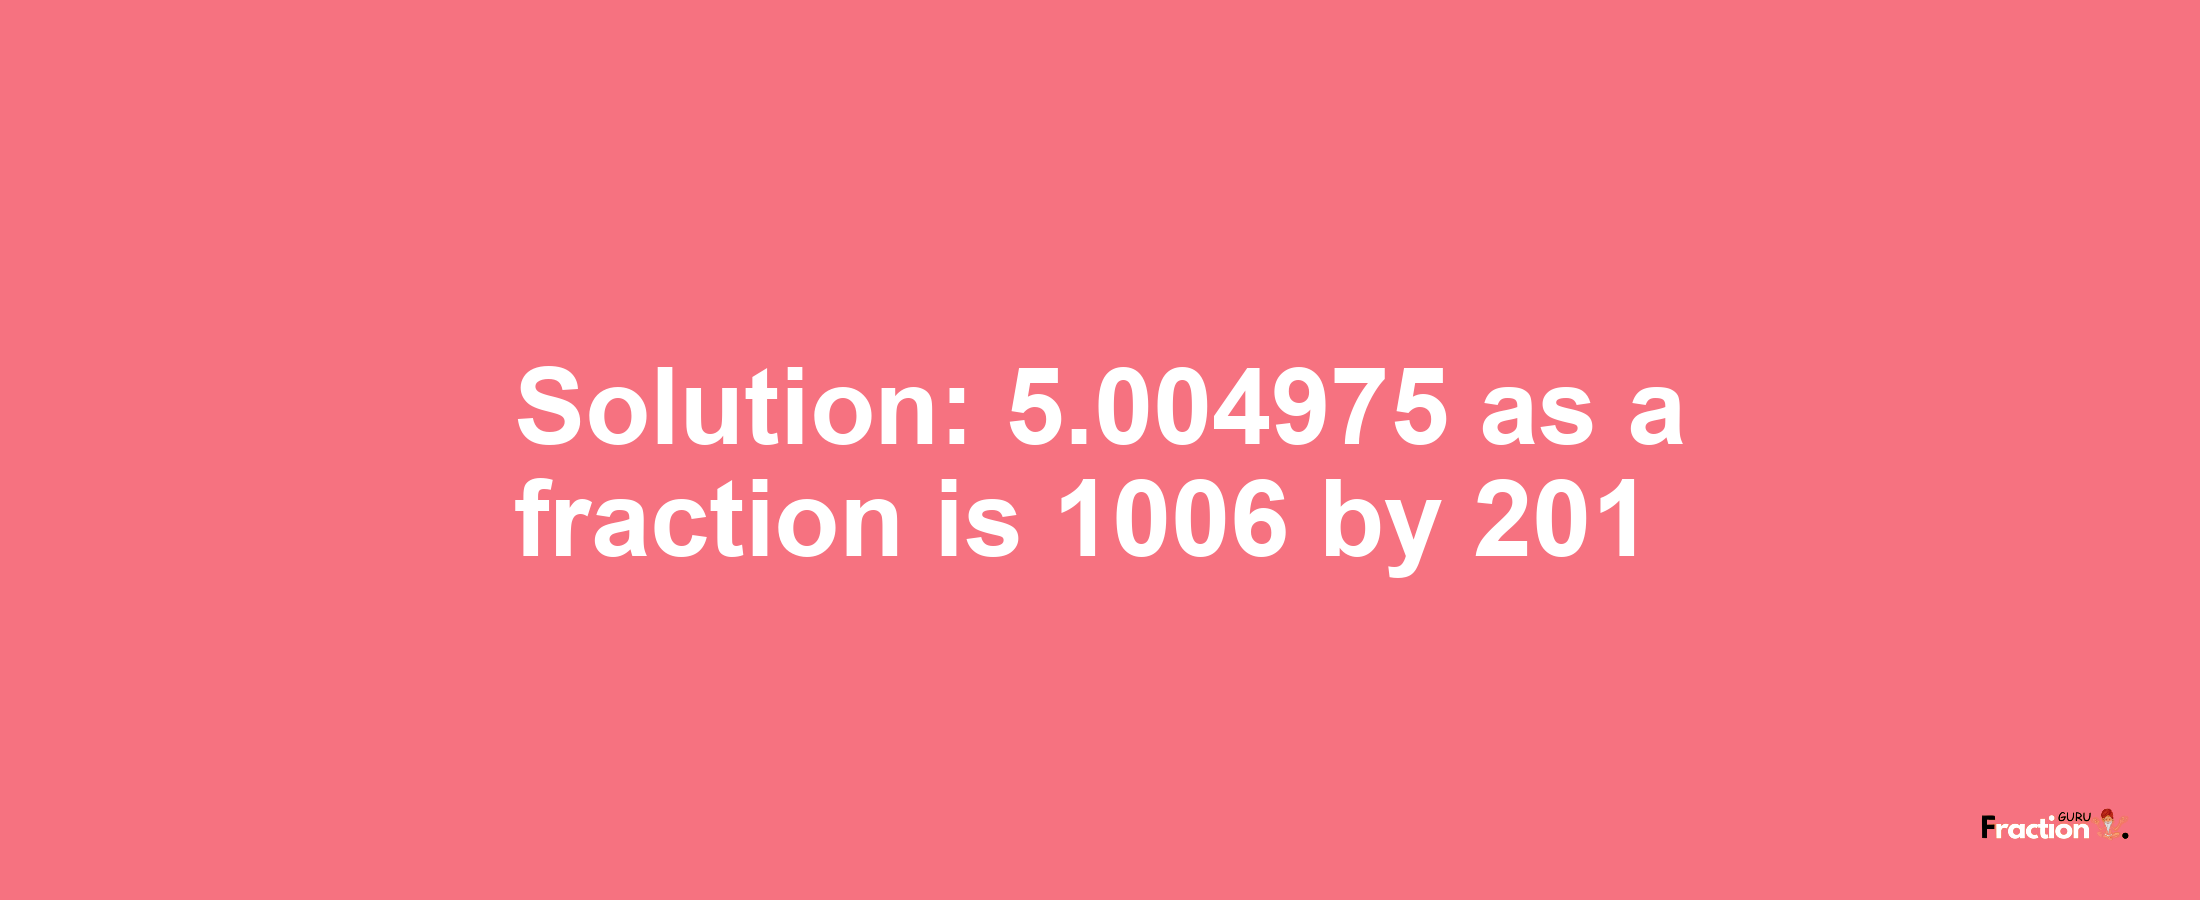 Solution:5.004975 as a fraction is 1006/201